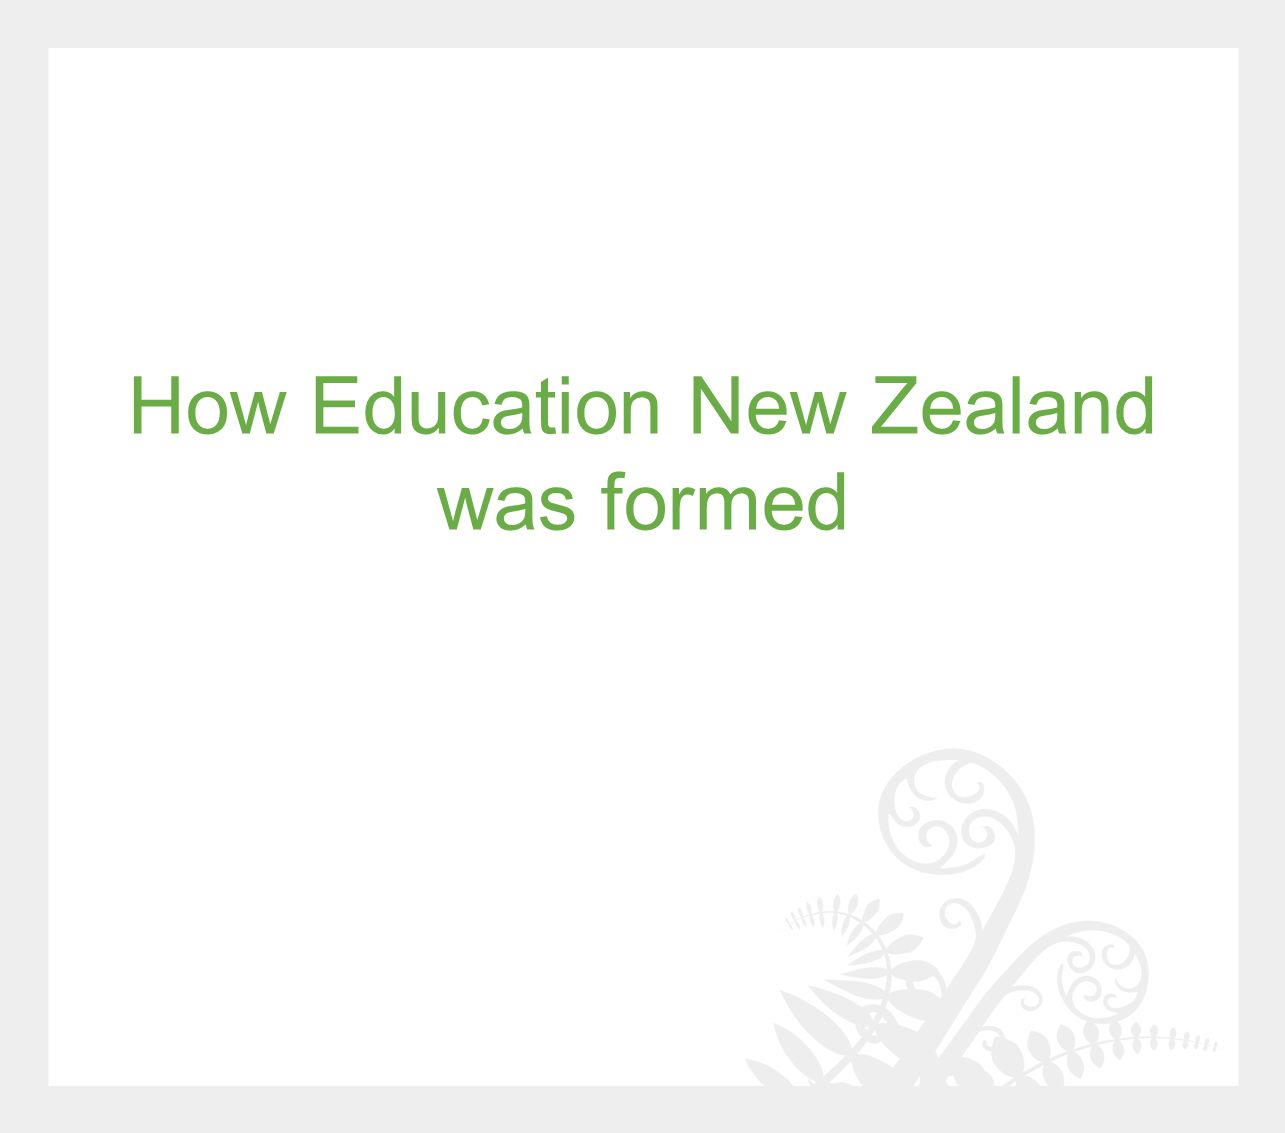 How Education New Zealand was formed